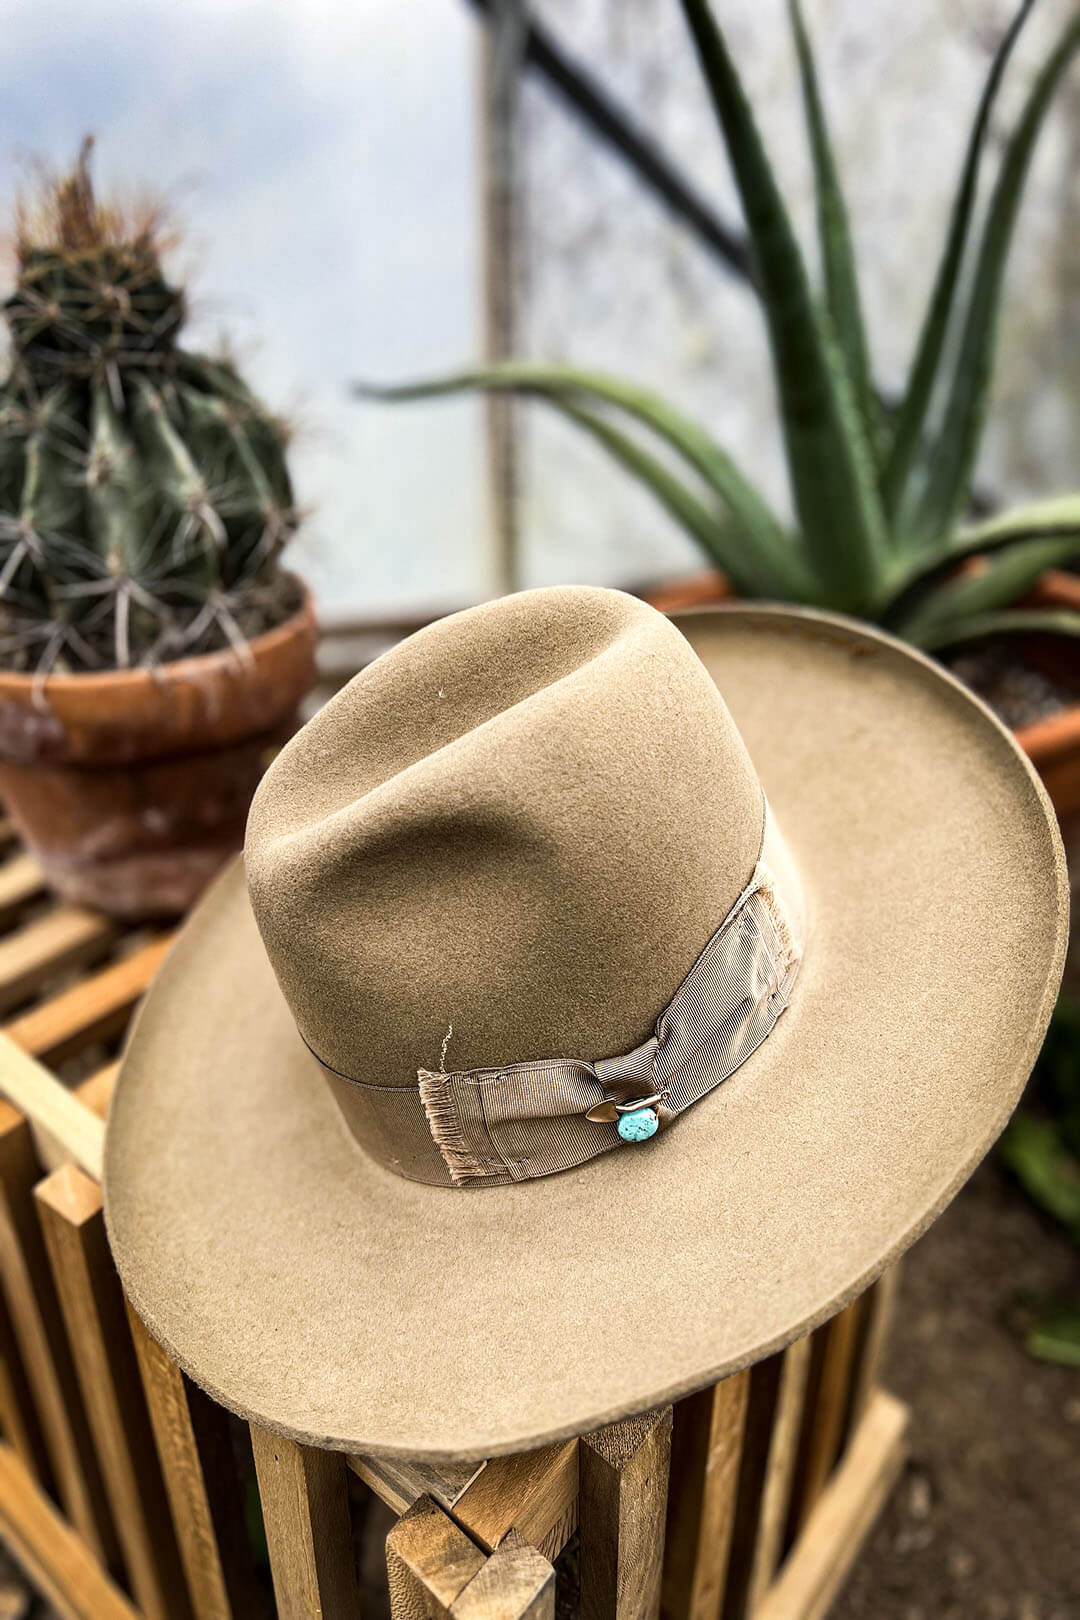 Picture of the Eureka Stetson Cowgirl Hat.  The hat is a fedora style hat.   Its features a ribbon hat band with a Turquoise stone on it. 